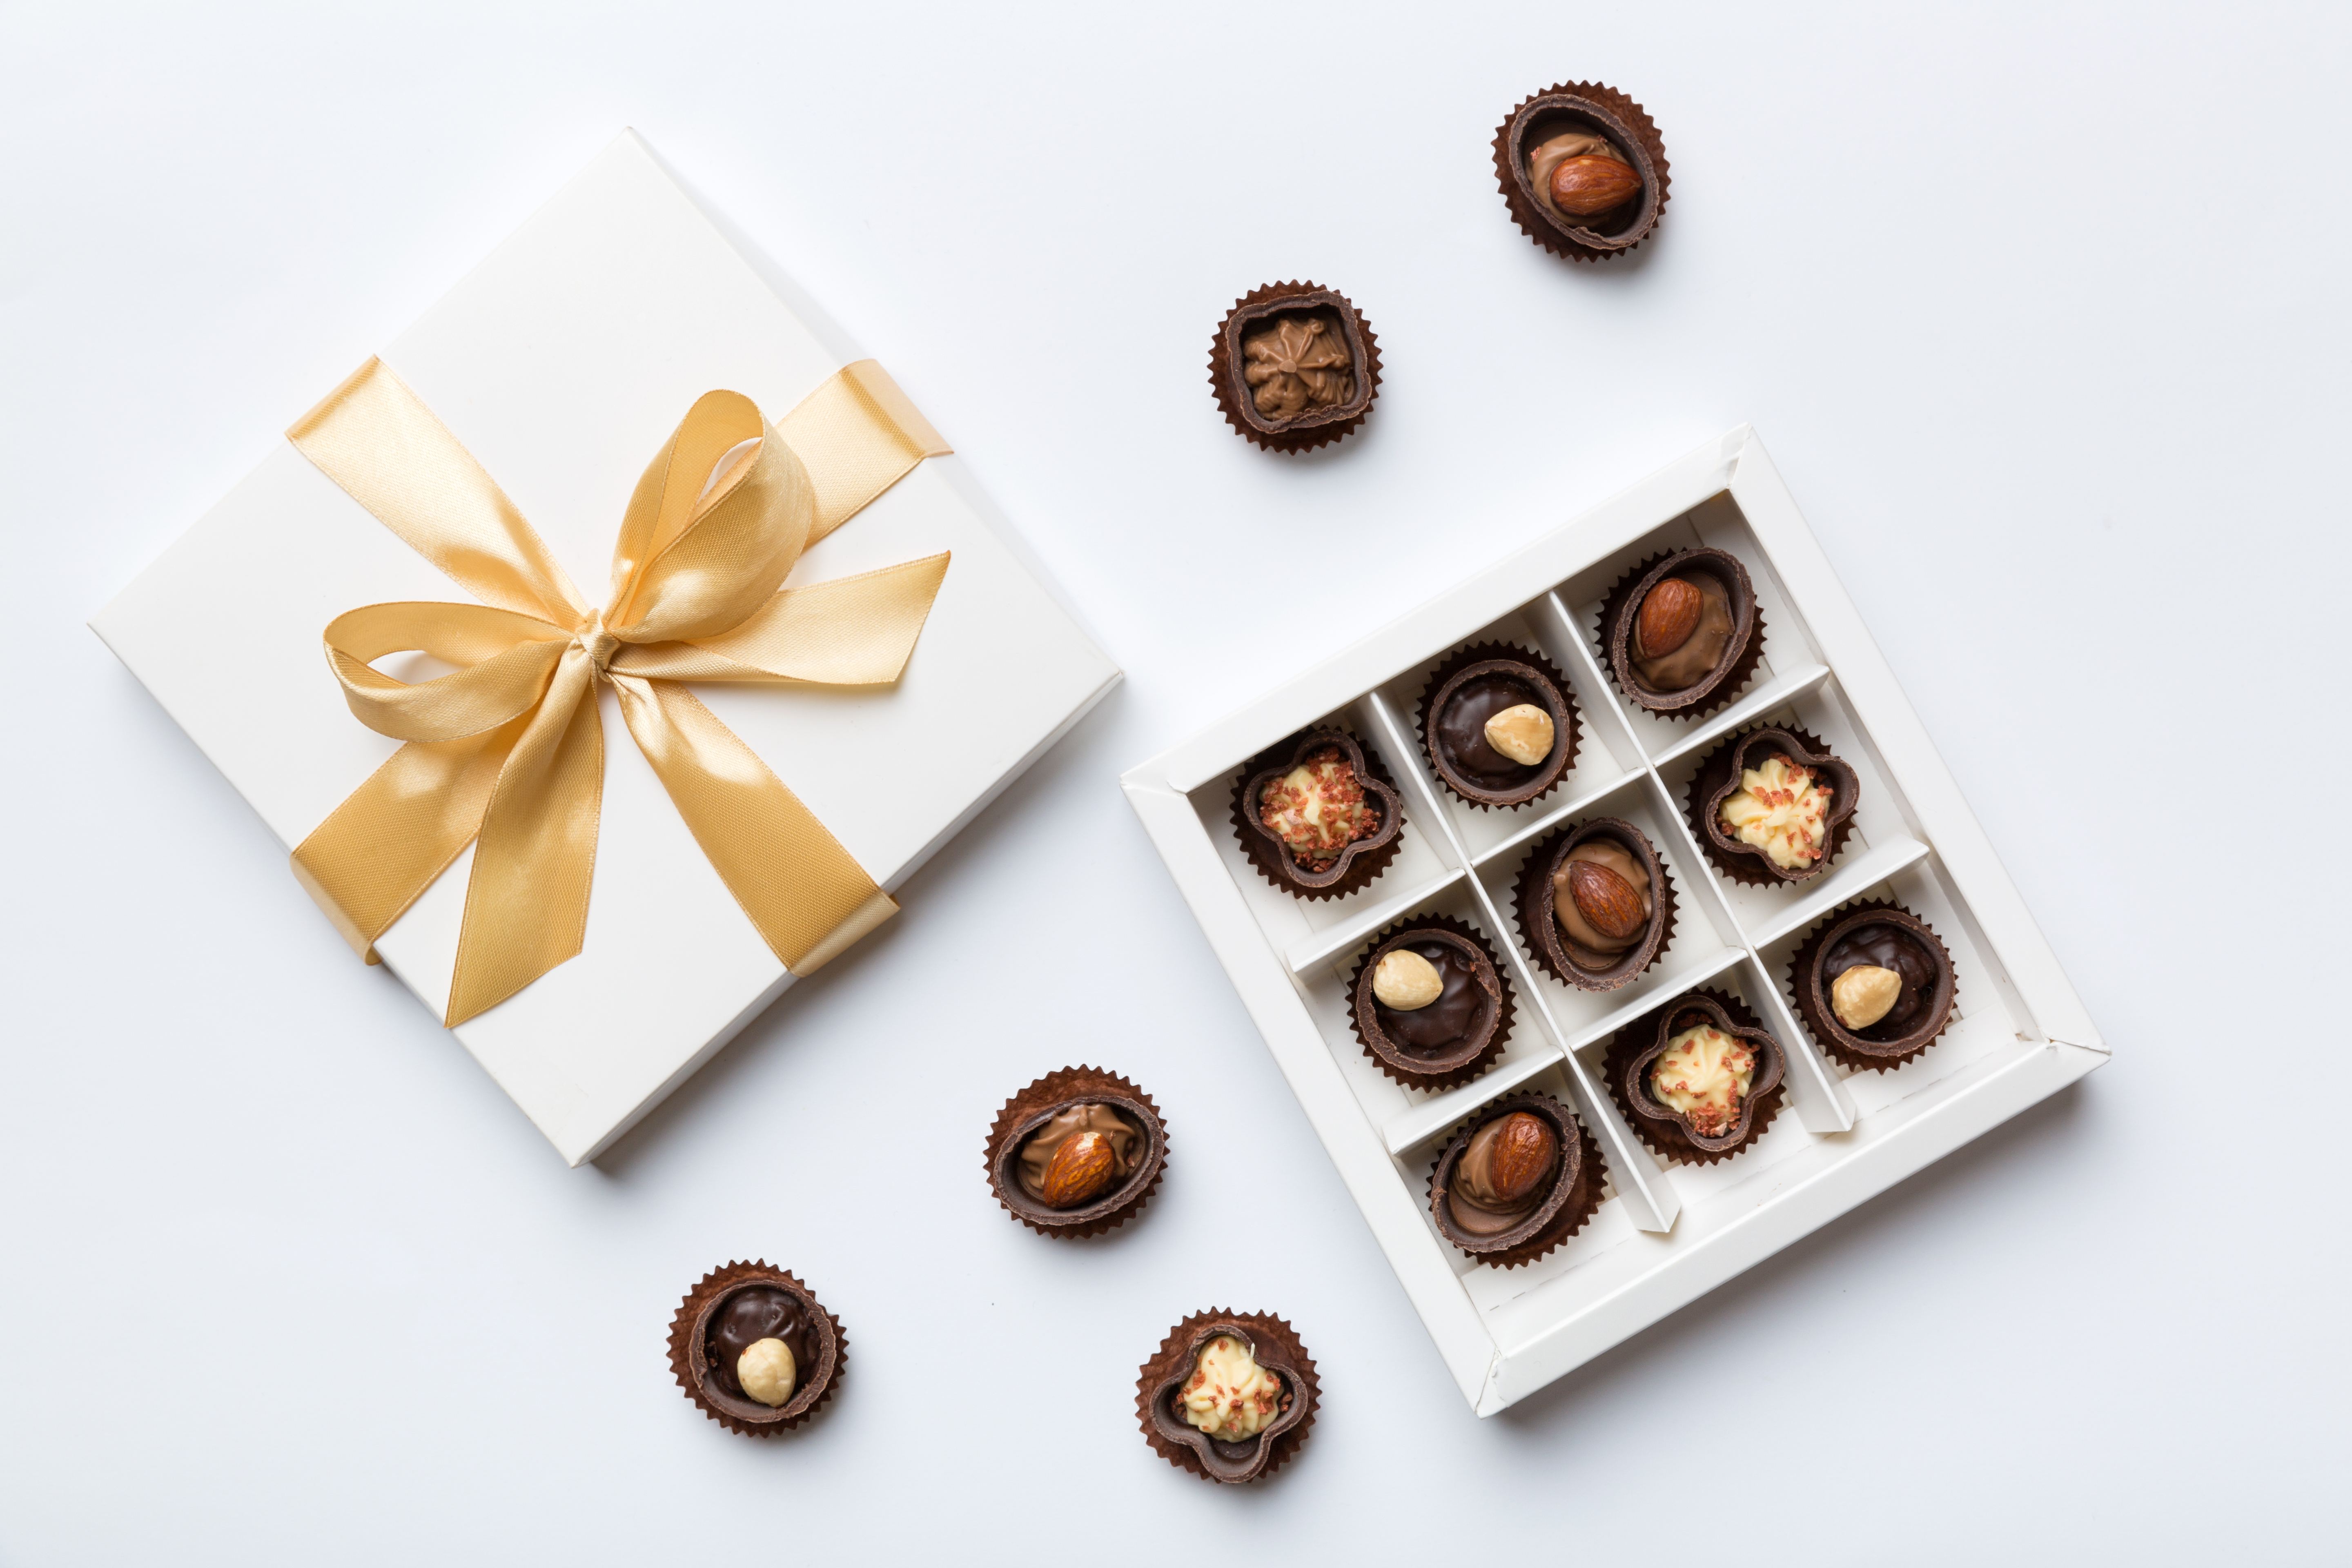 A gift box of gourmet chocolates for a special someone on Valentine’s Day.